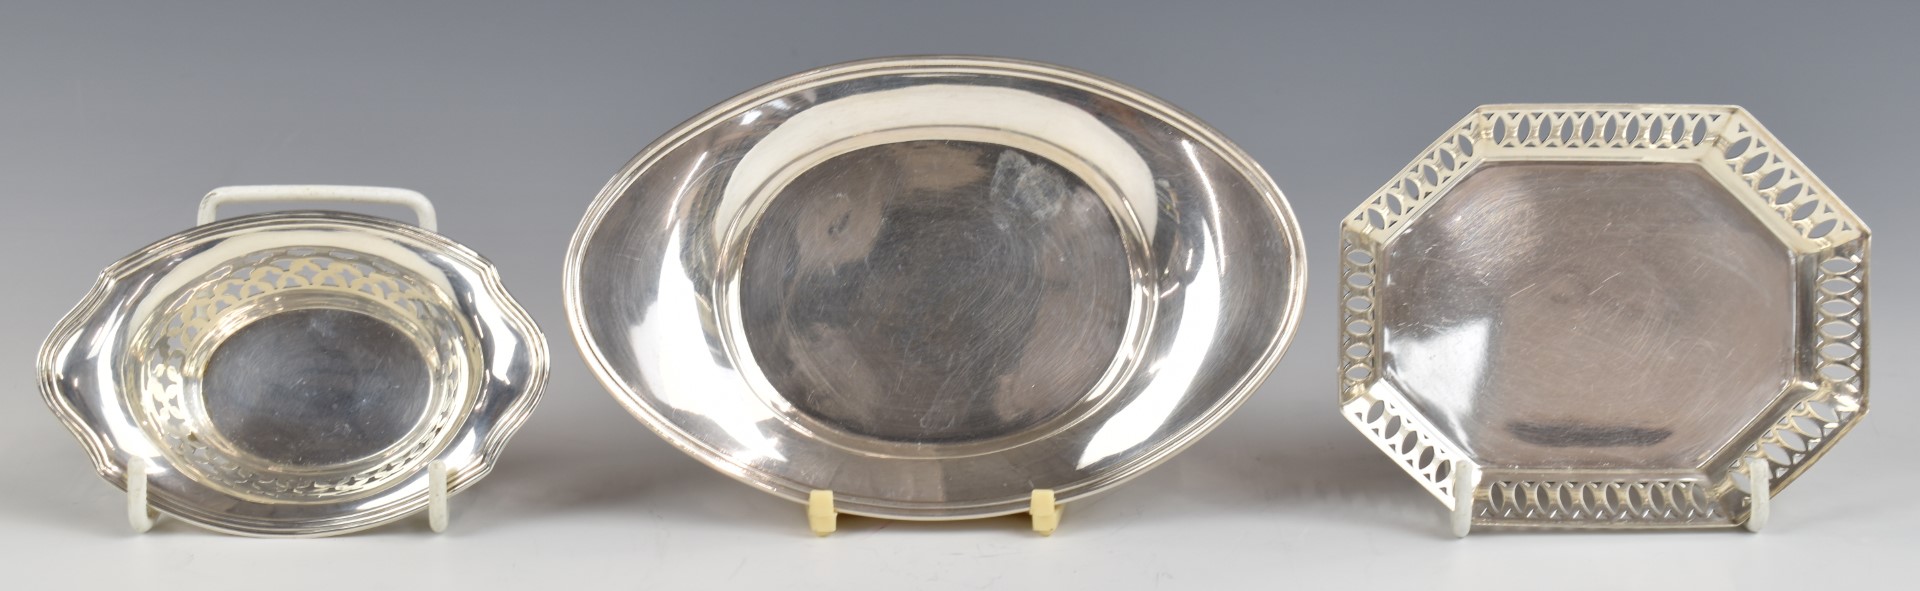 Three American Birks silver dishes, one raised on four ball feet, length of longest 14.5cm, weight